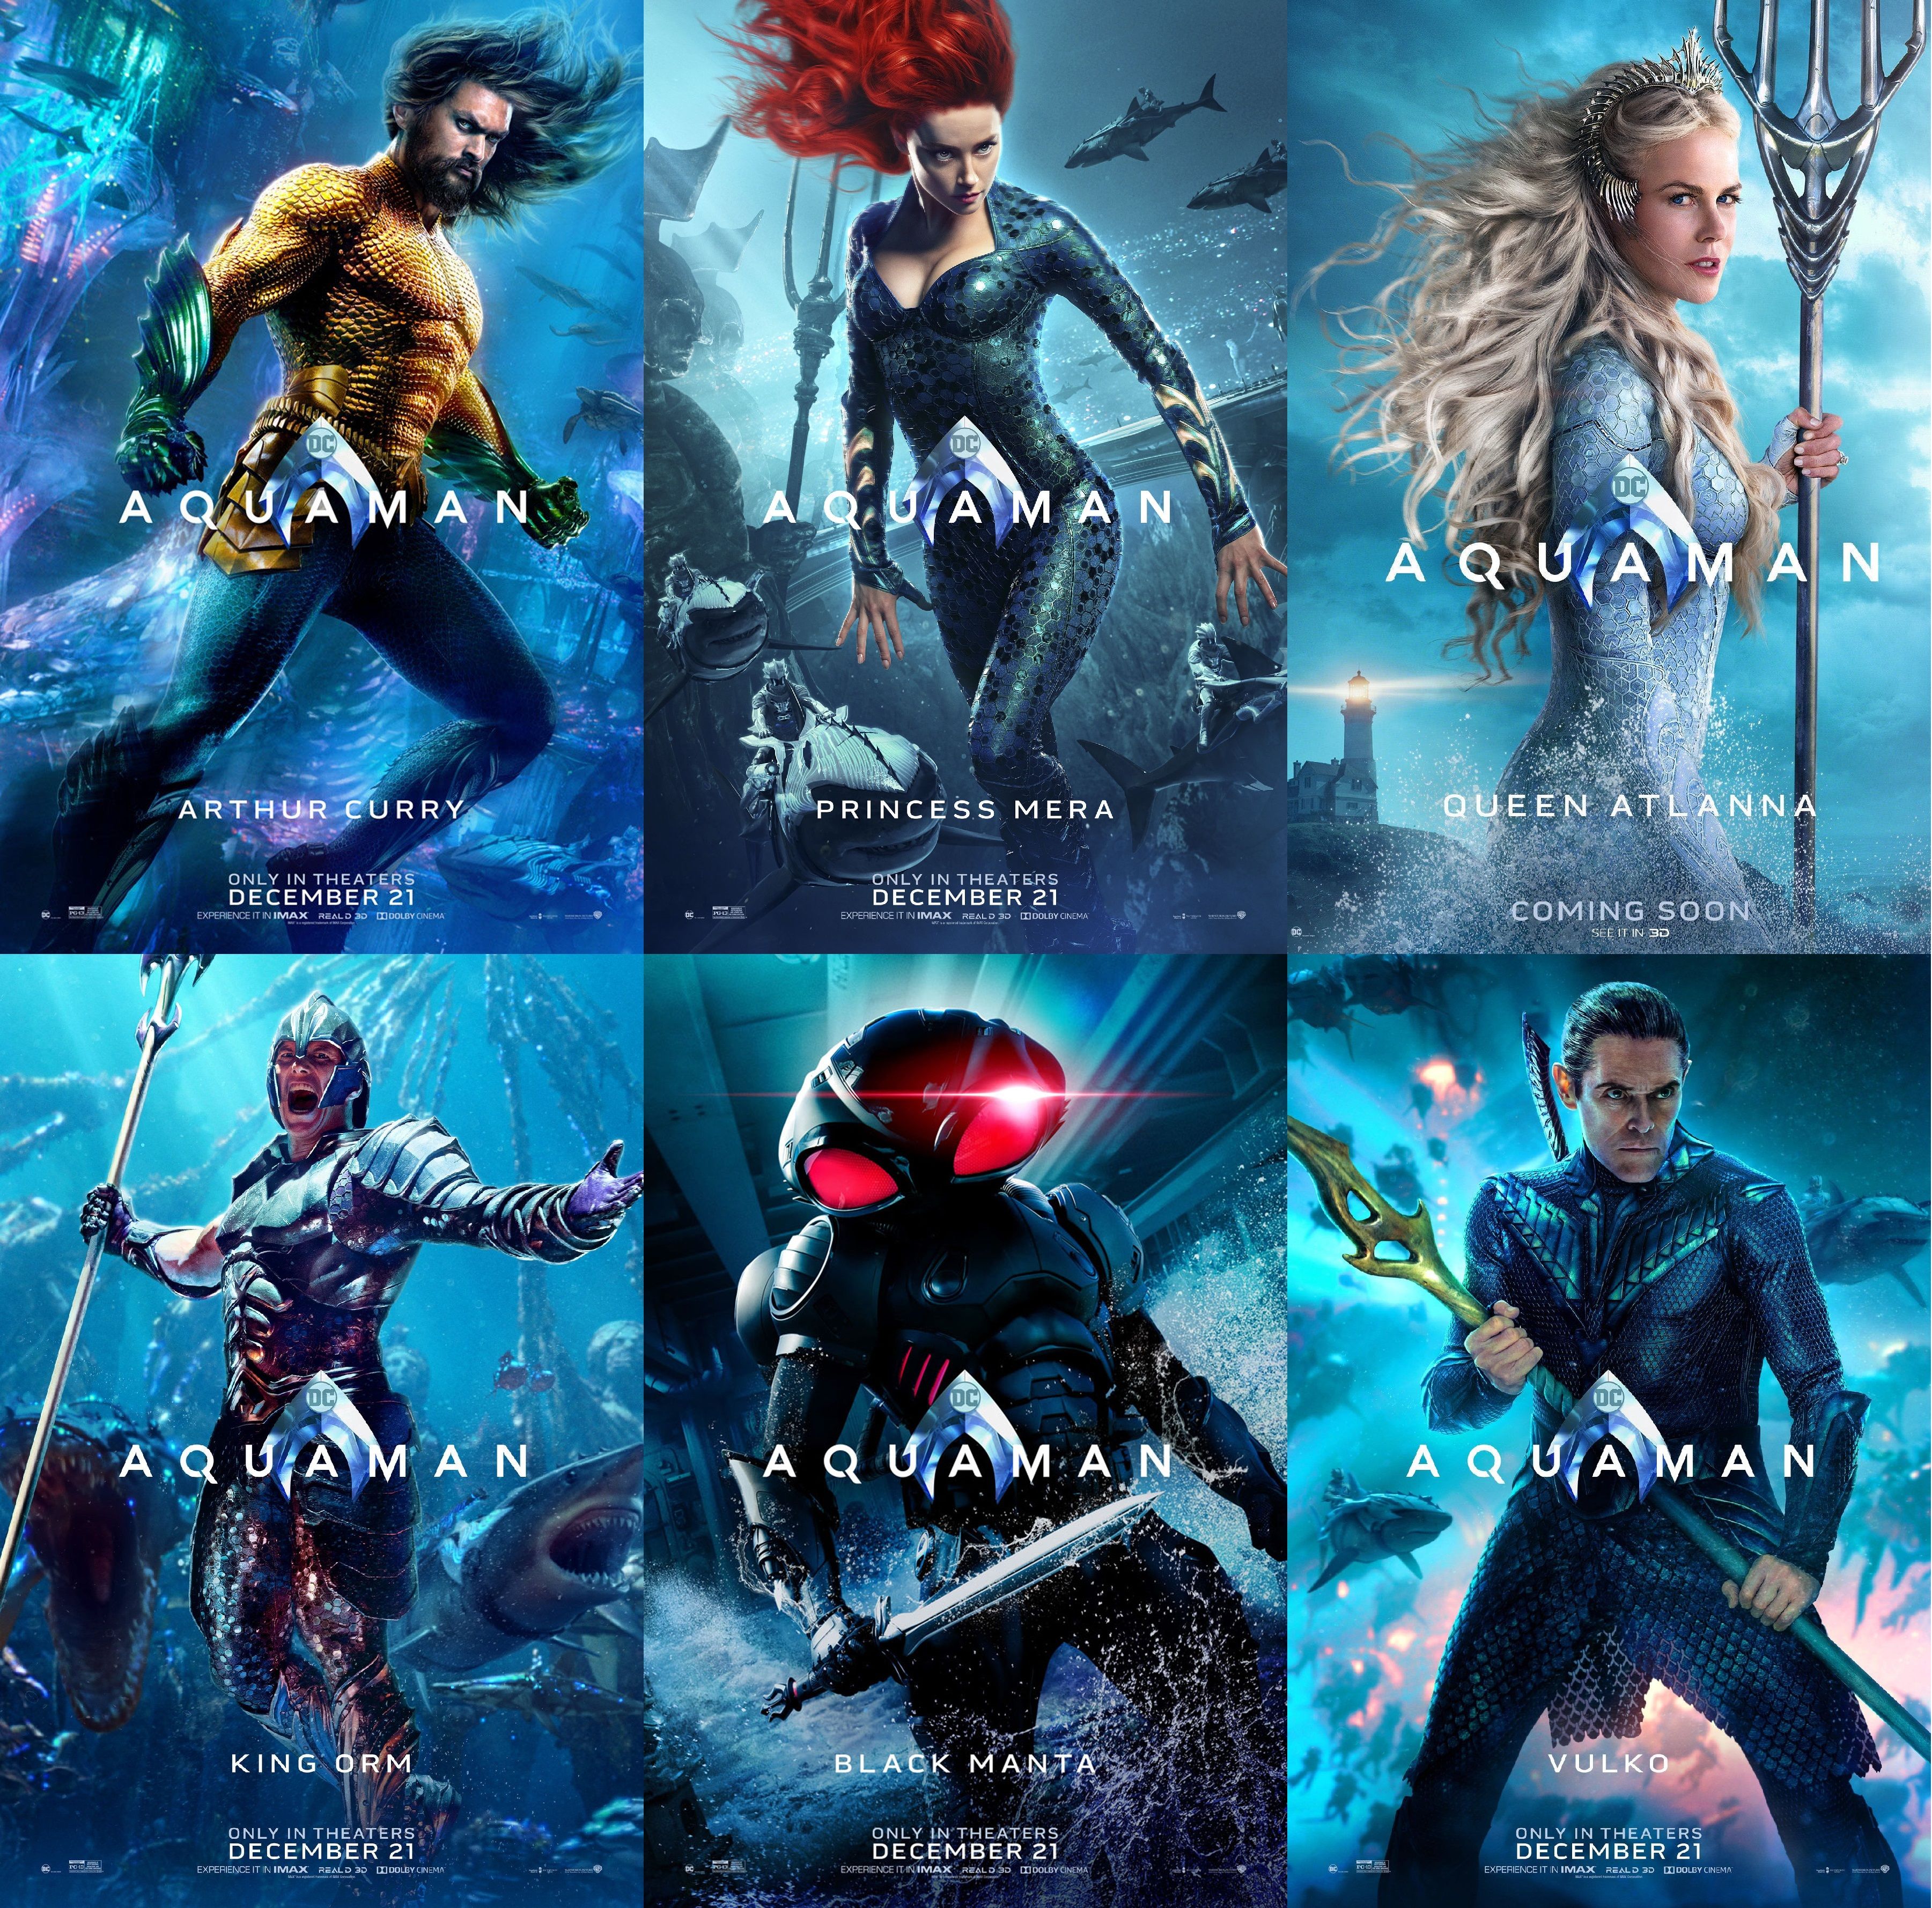 OTHER: I combined the Aquaman posters into a single image